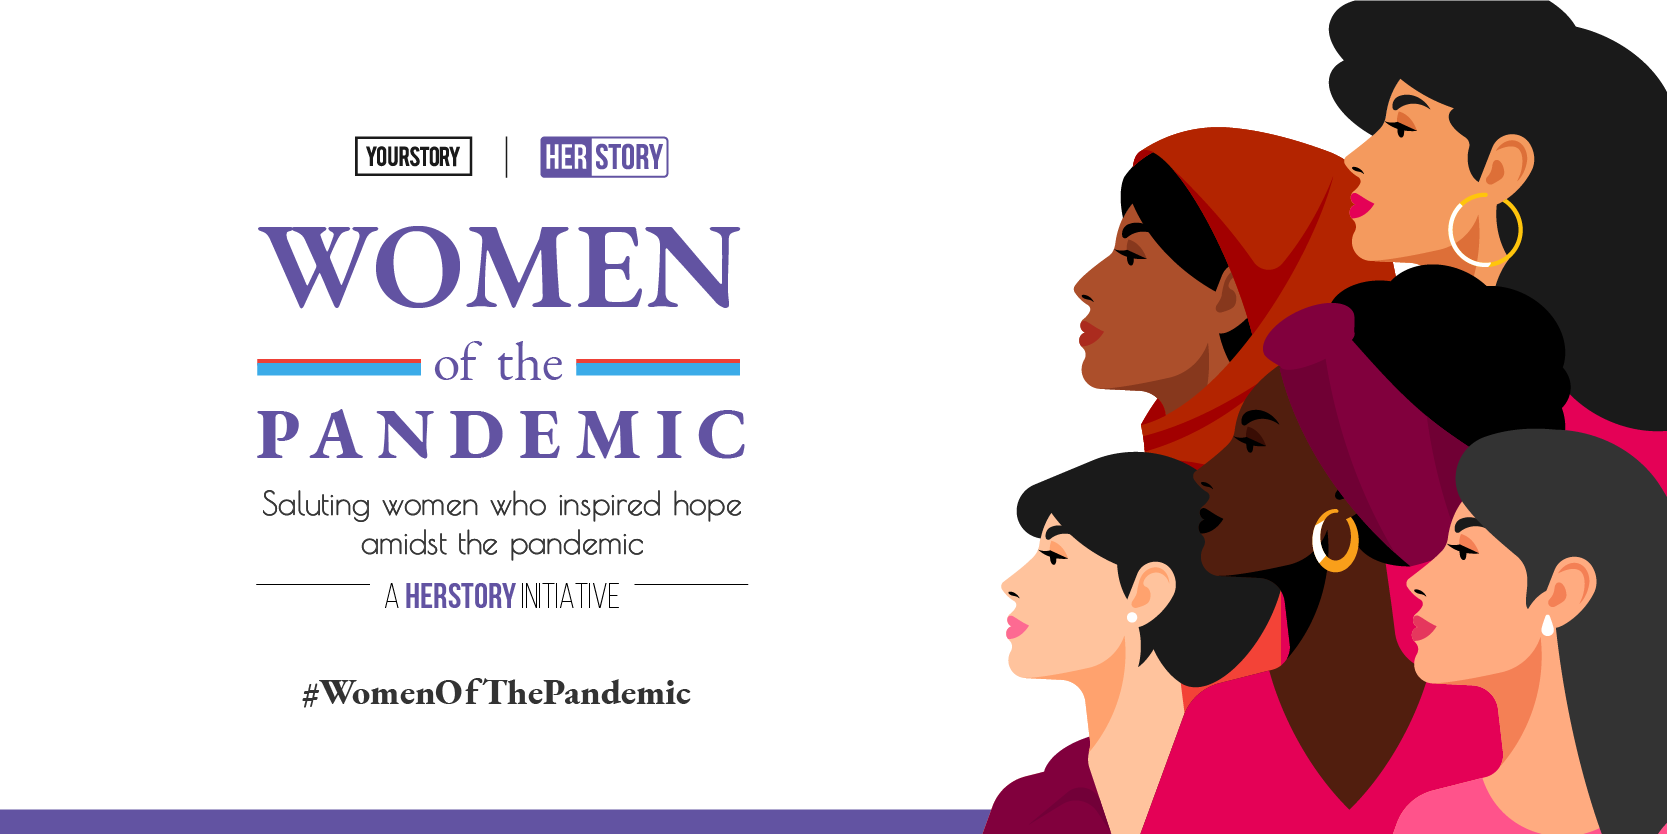 Women of the Pandemic: Kiran Mazumdar-Shaw reveals her experience, learnings from the crisis